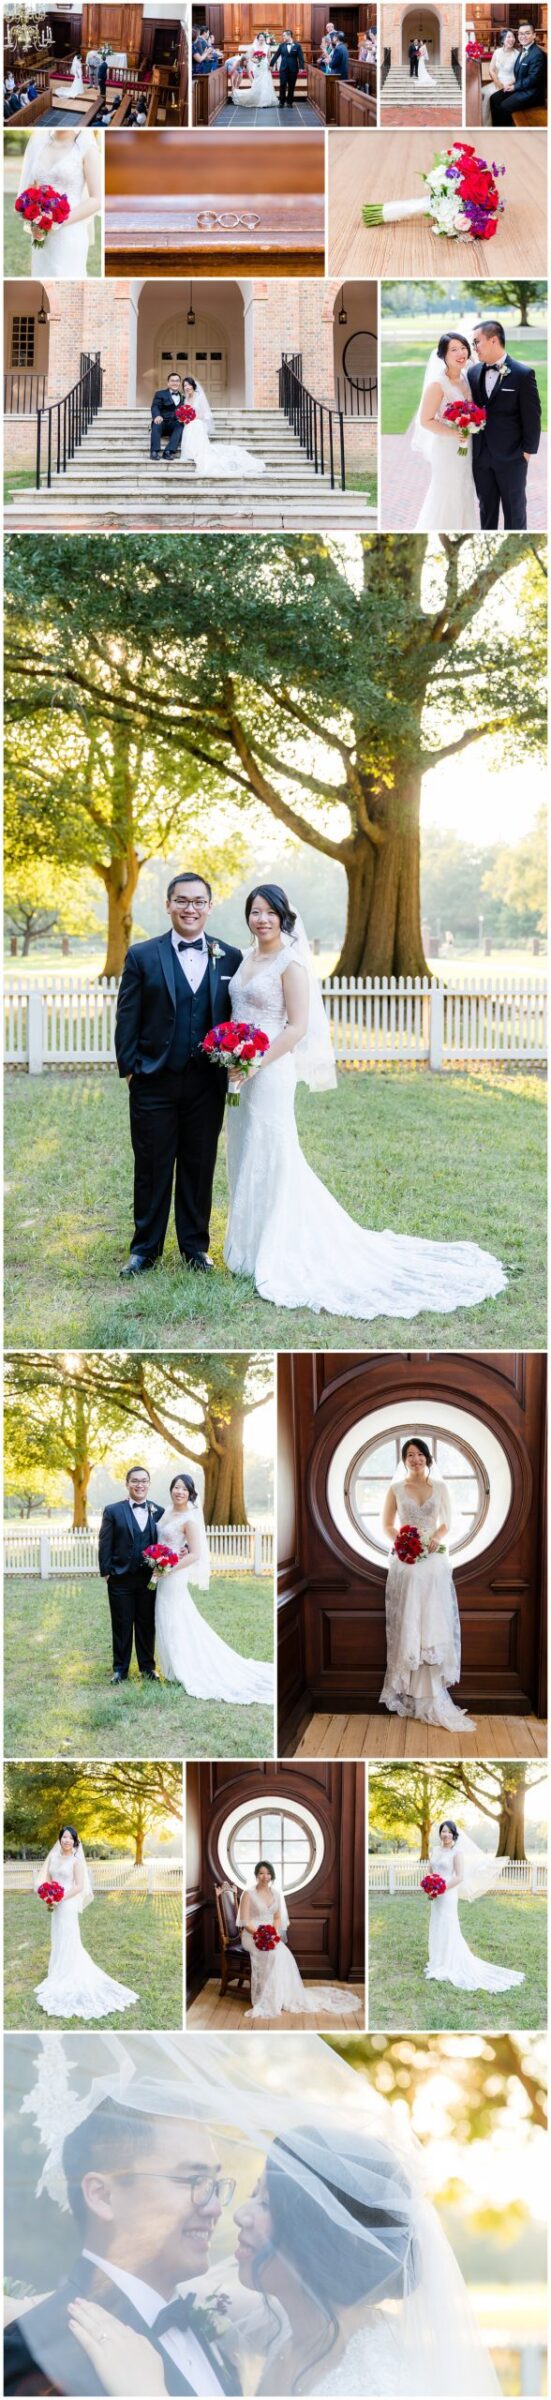 Collage of images at the Wren Building and campus for Wren Chapel William and Mary wedding